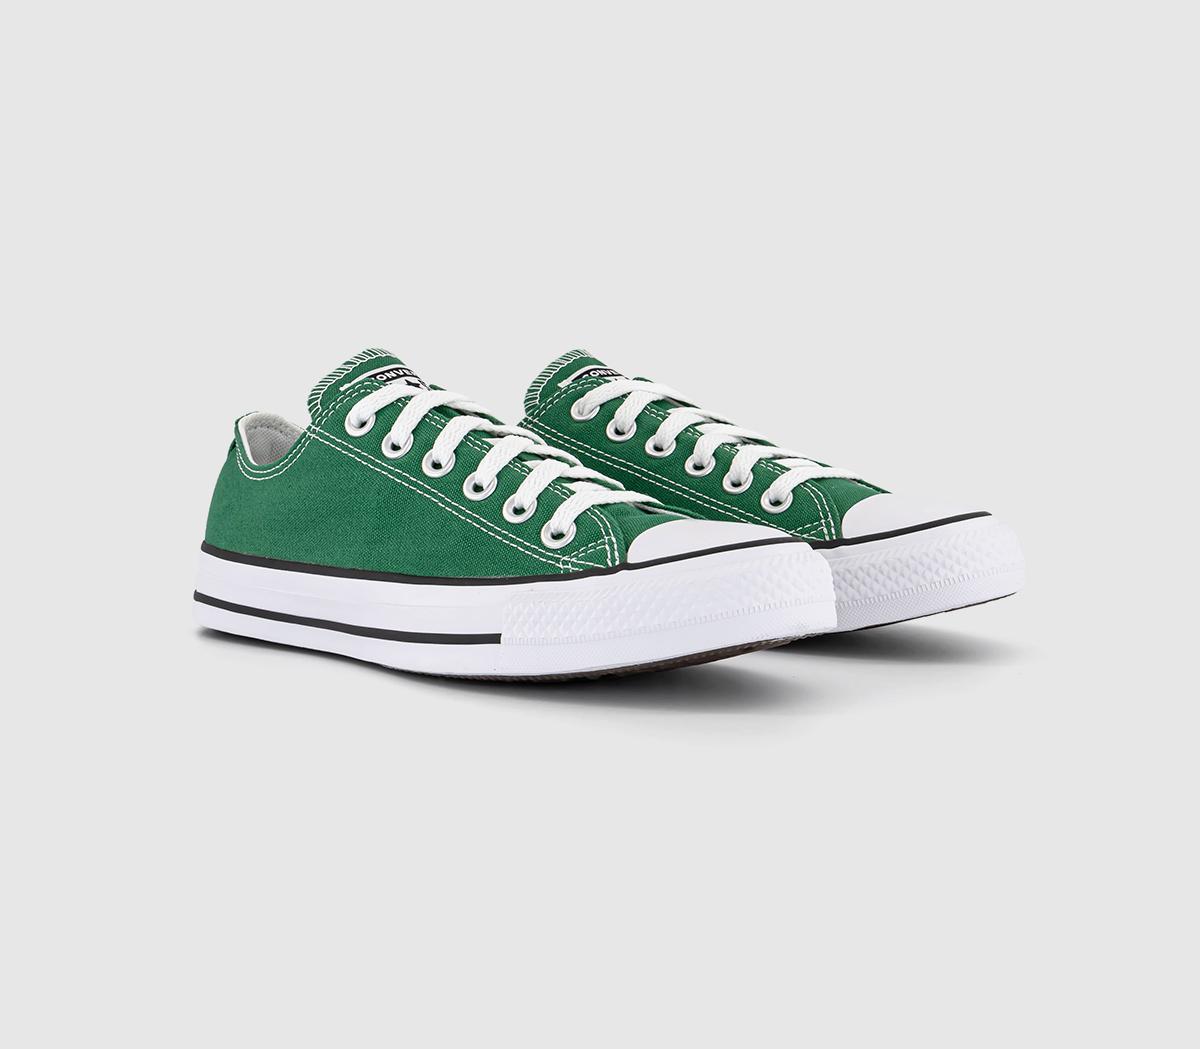 Converse All Star Low Trainers Amazon Green, 5.5